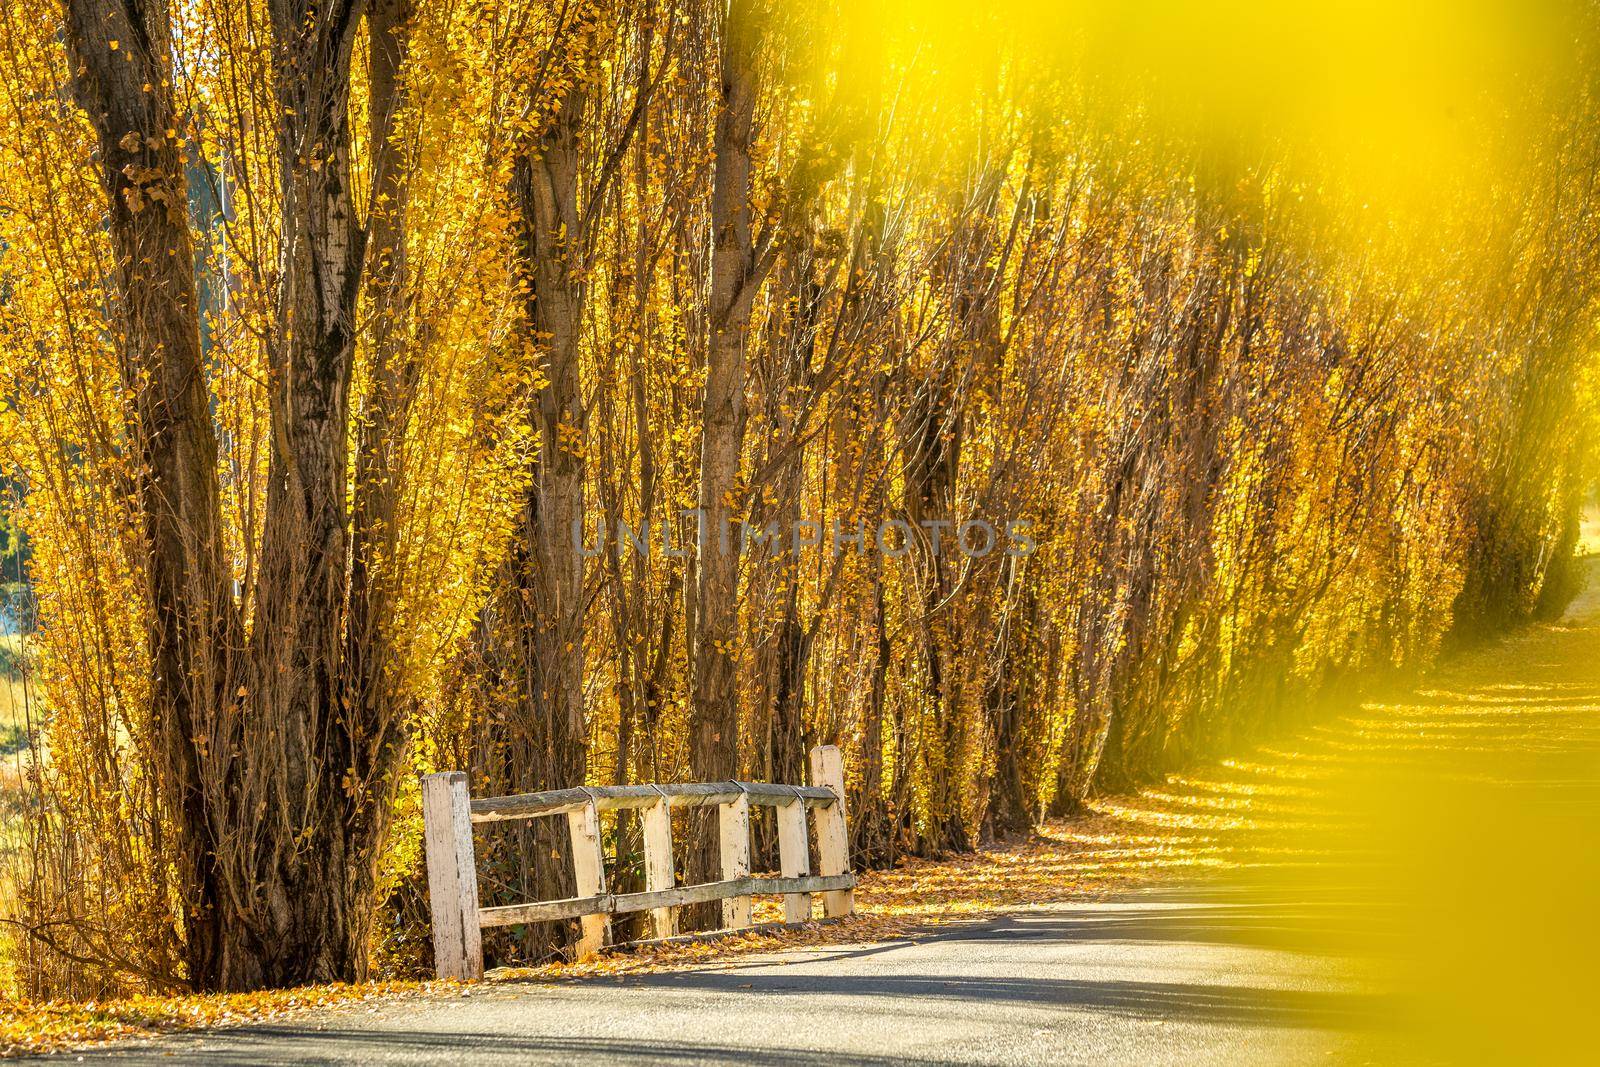 Country lane lined with golden poplars in autumn sunlight